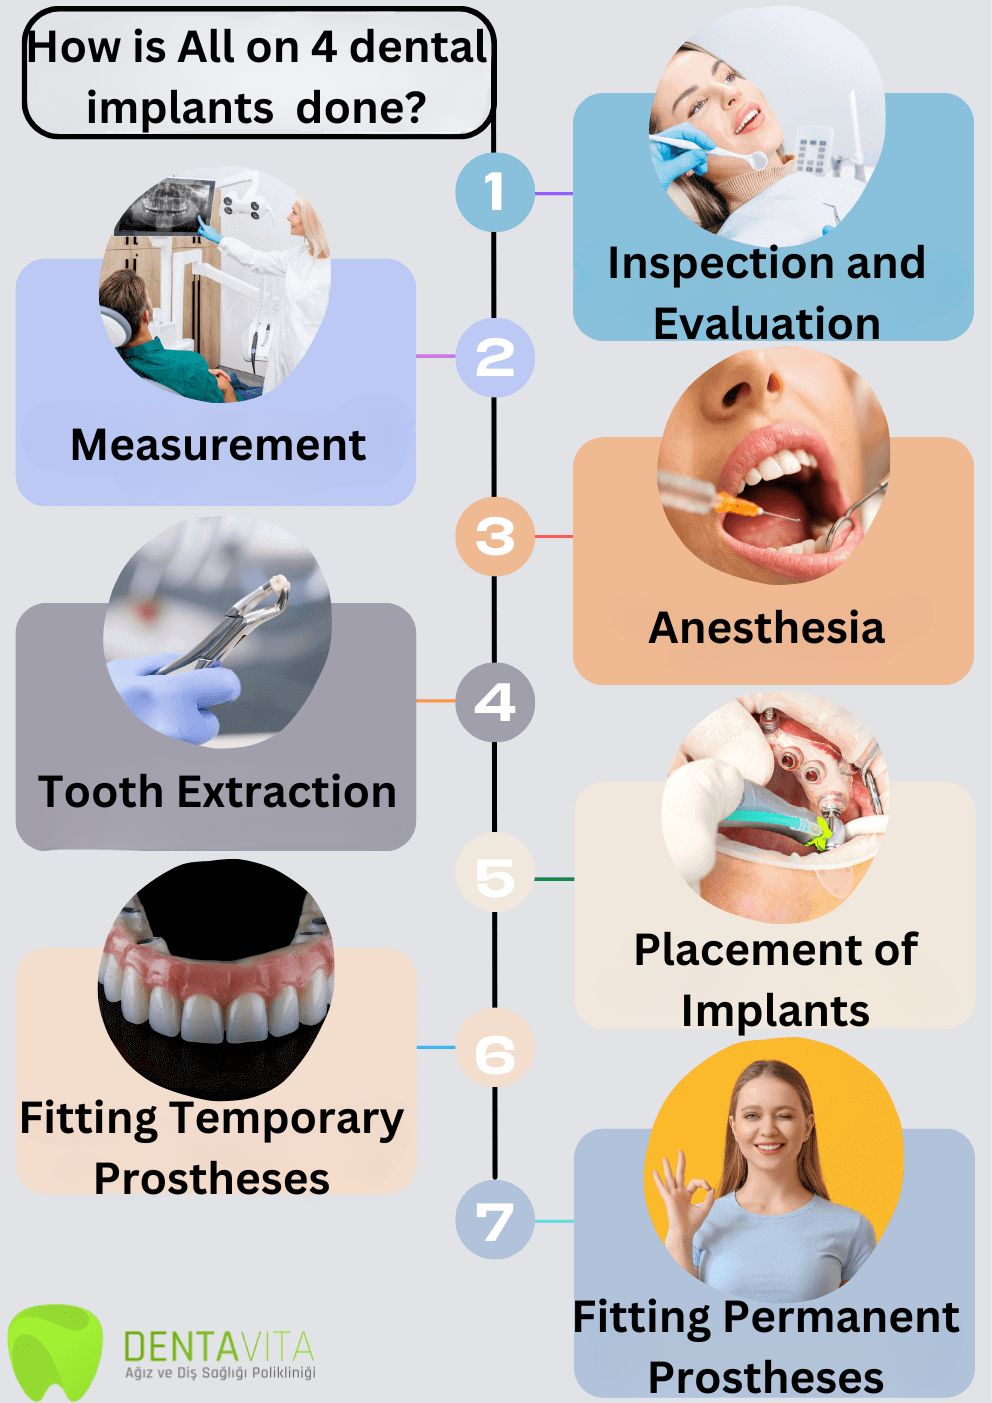 How is All on 4 dental implants done?